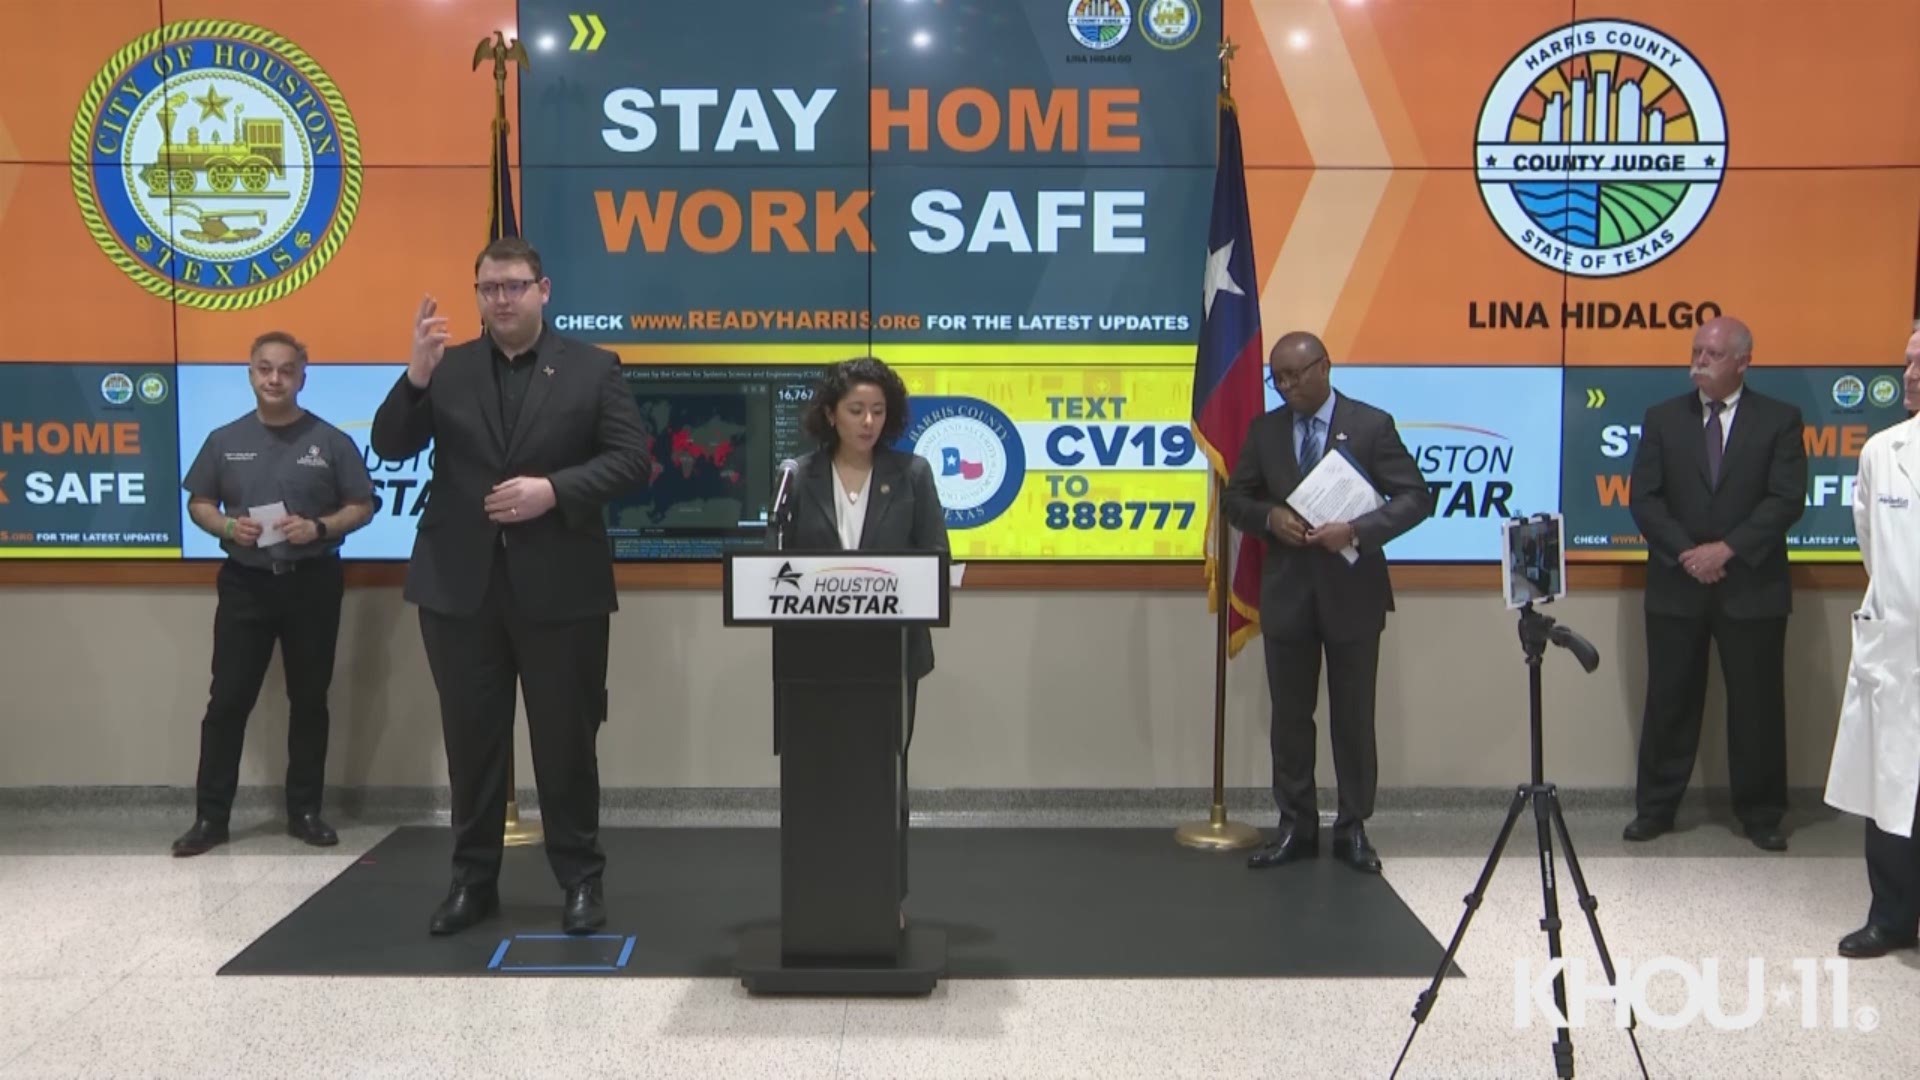 Harris County Judge Lina Hidalgo said Tuesday new numbers in the Houston area showed that we "must take further steps" to help prevent the spread of COVID-19,